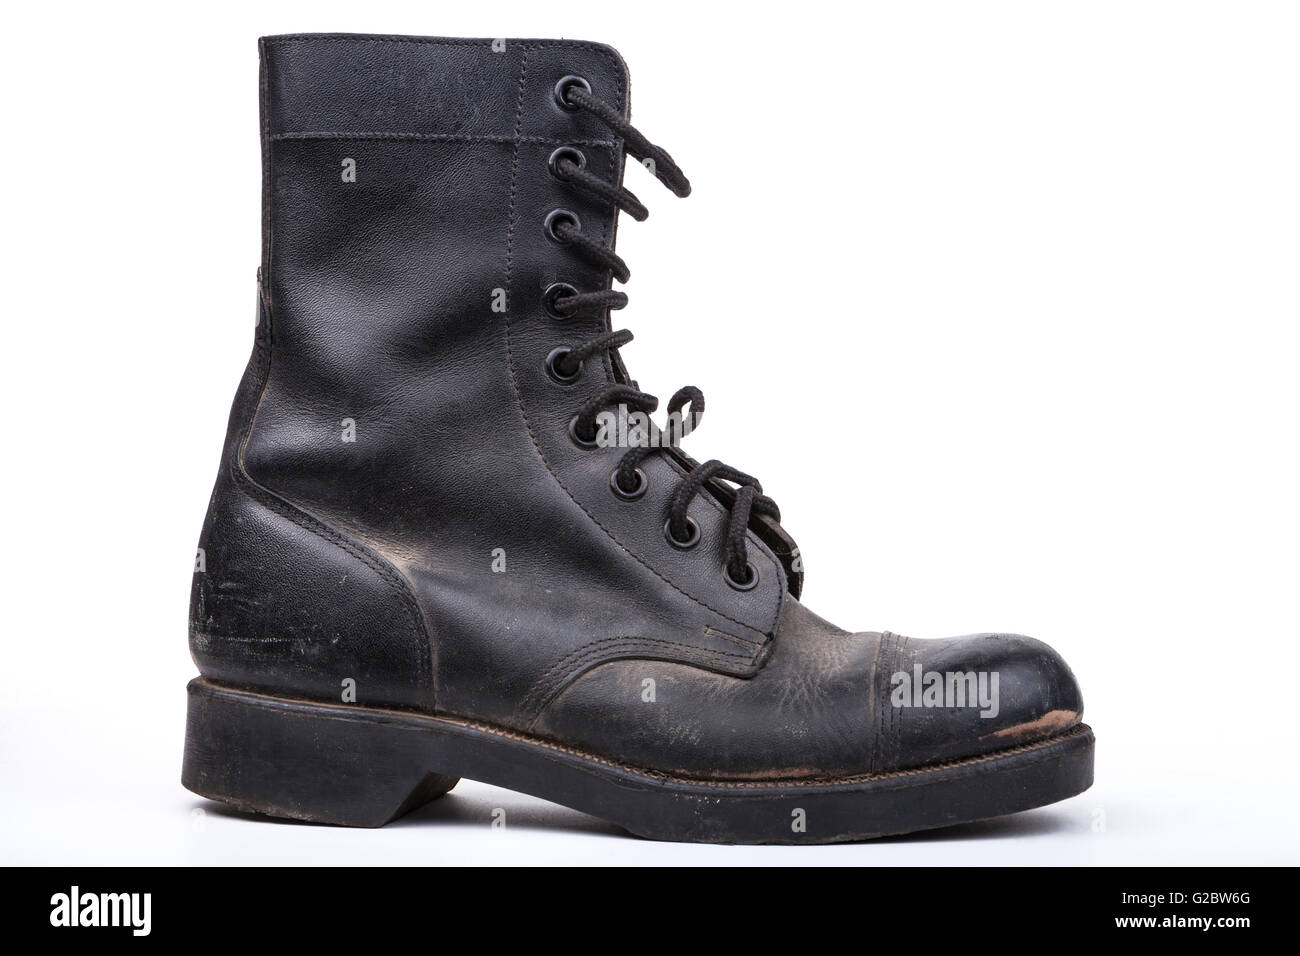 One Black Dirty army boot isolated on white background Stock Photo - Alamy